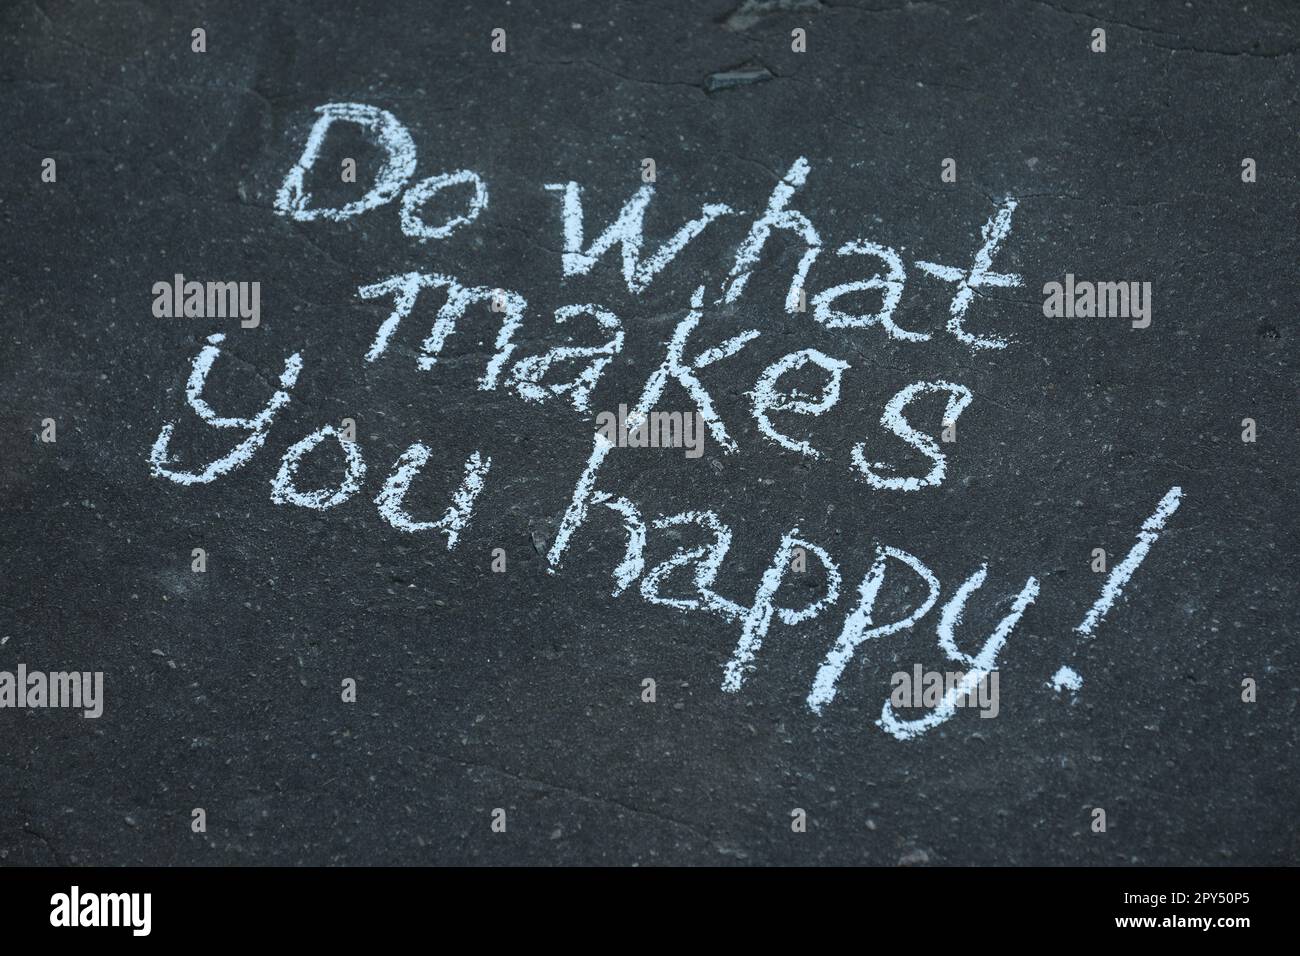 Phrase Do What Makes You Happy with exclamation mark written on asphalt Stock Photo